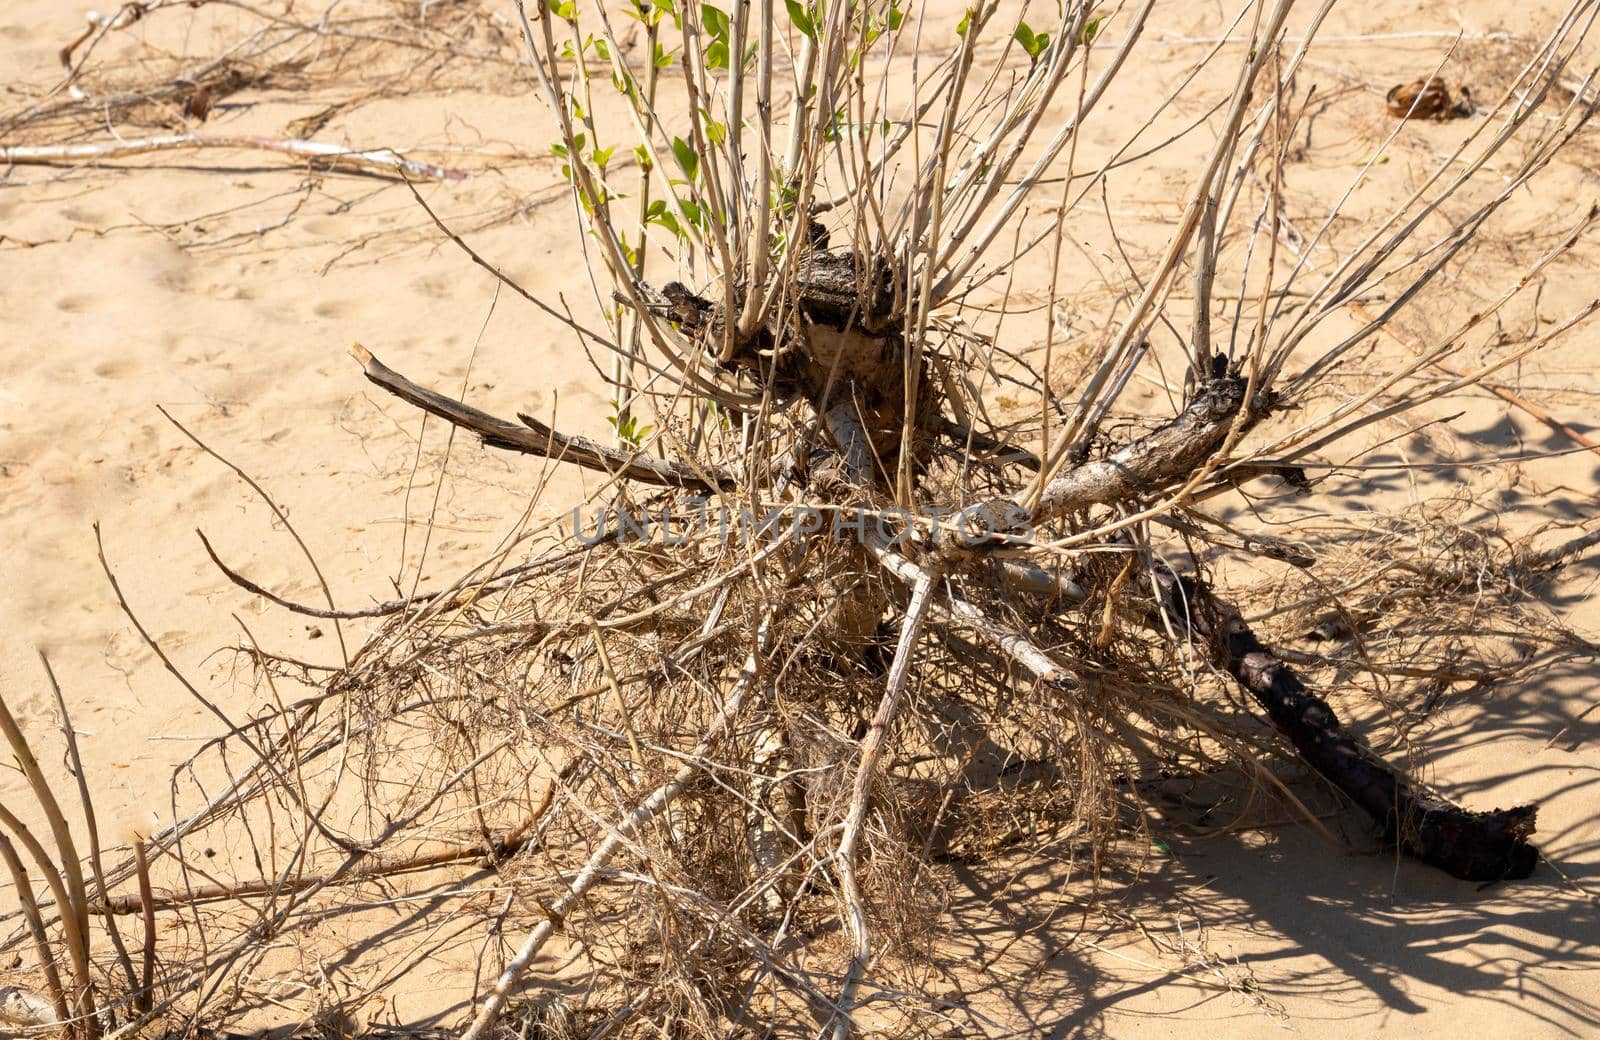 dry shrub grown in the depressed wild sand and drought of the desert.